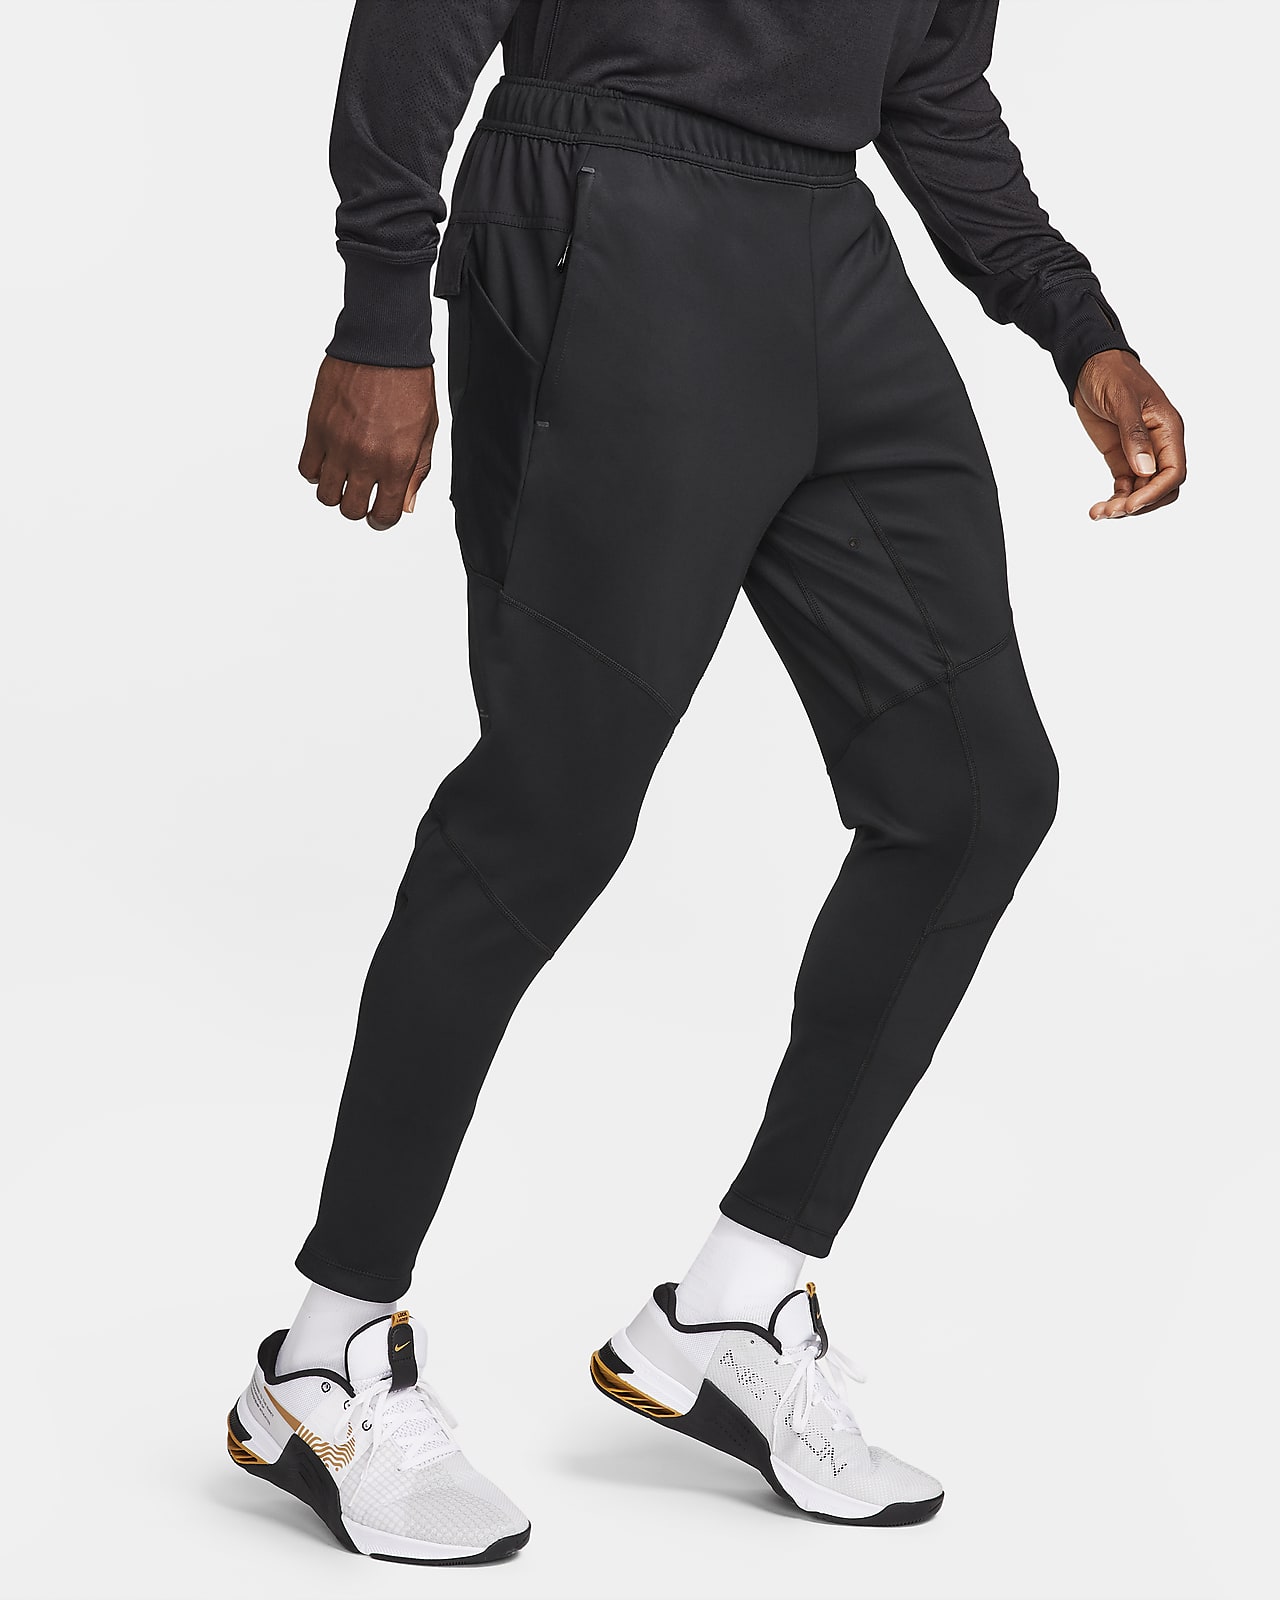 The Best Nike Running Trousers. Nike HR